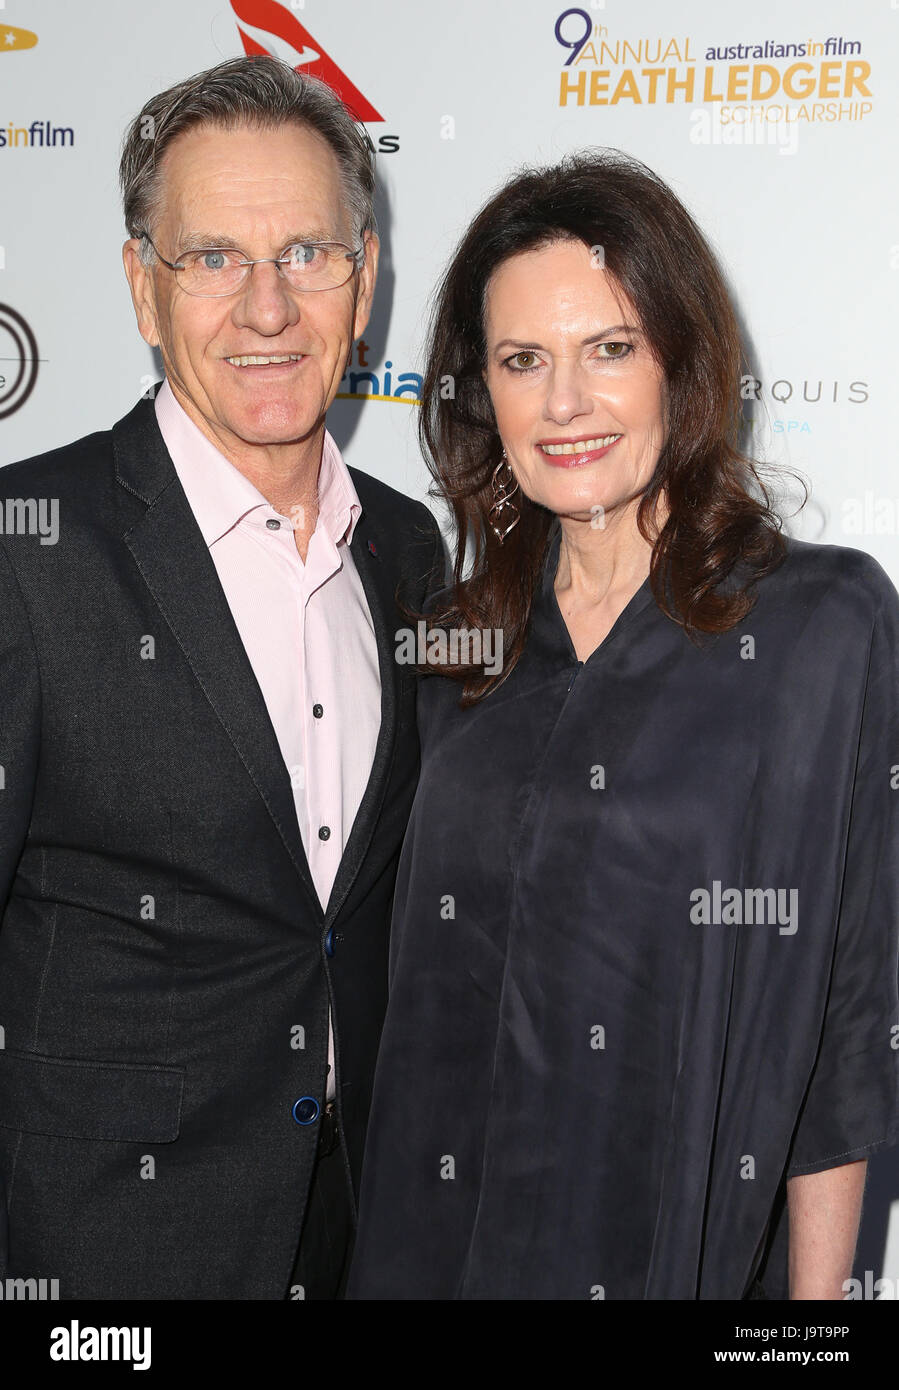 West Hollywood, CA, USA. 1st June, 2017. 01 June 2017 - West Hollywood, California - Roger Bell, Sally Bell. The 9th Annual Australians In Film Heath Ledger Scholarship Dinner. Photo Credit: F. Sadou/AdMedia Credit: F. Sadou/AdMedia/ZUMA Wire/Alamy Live News Stock Photo